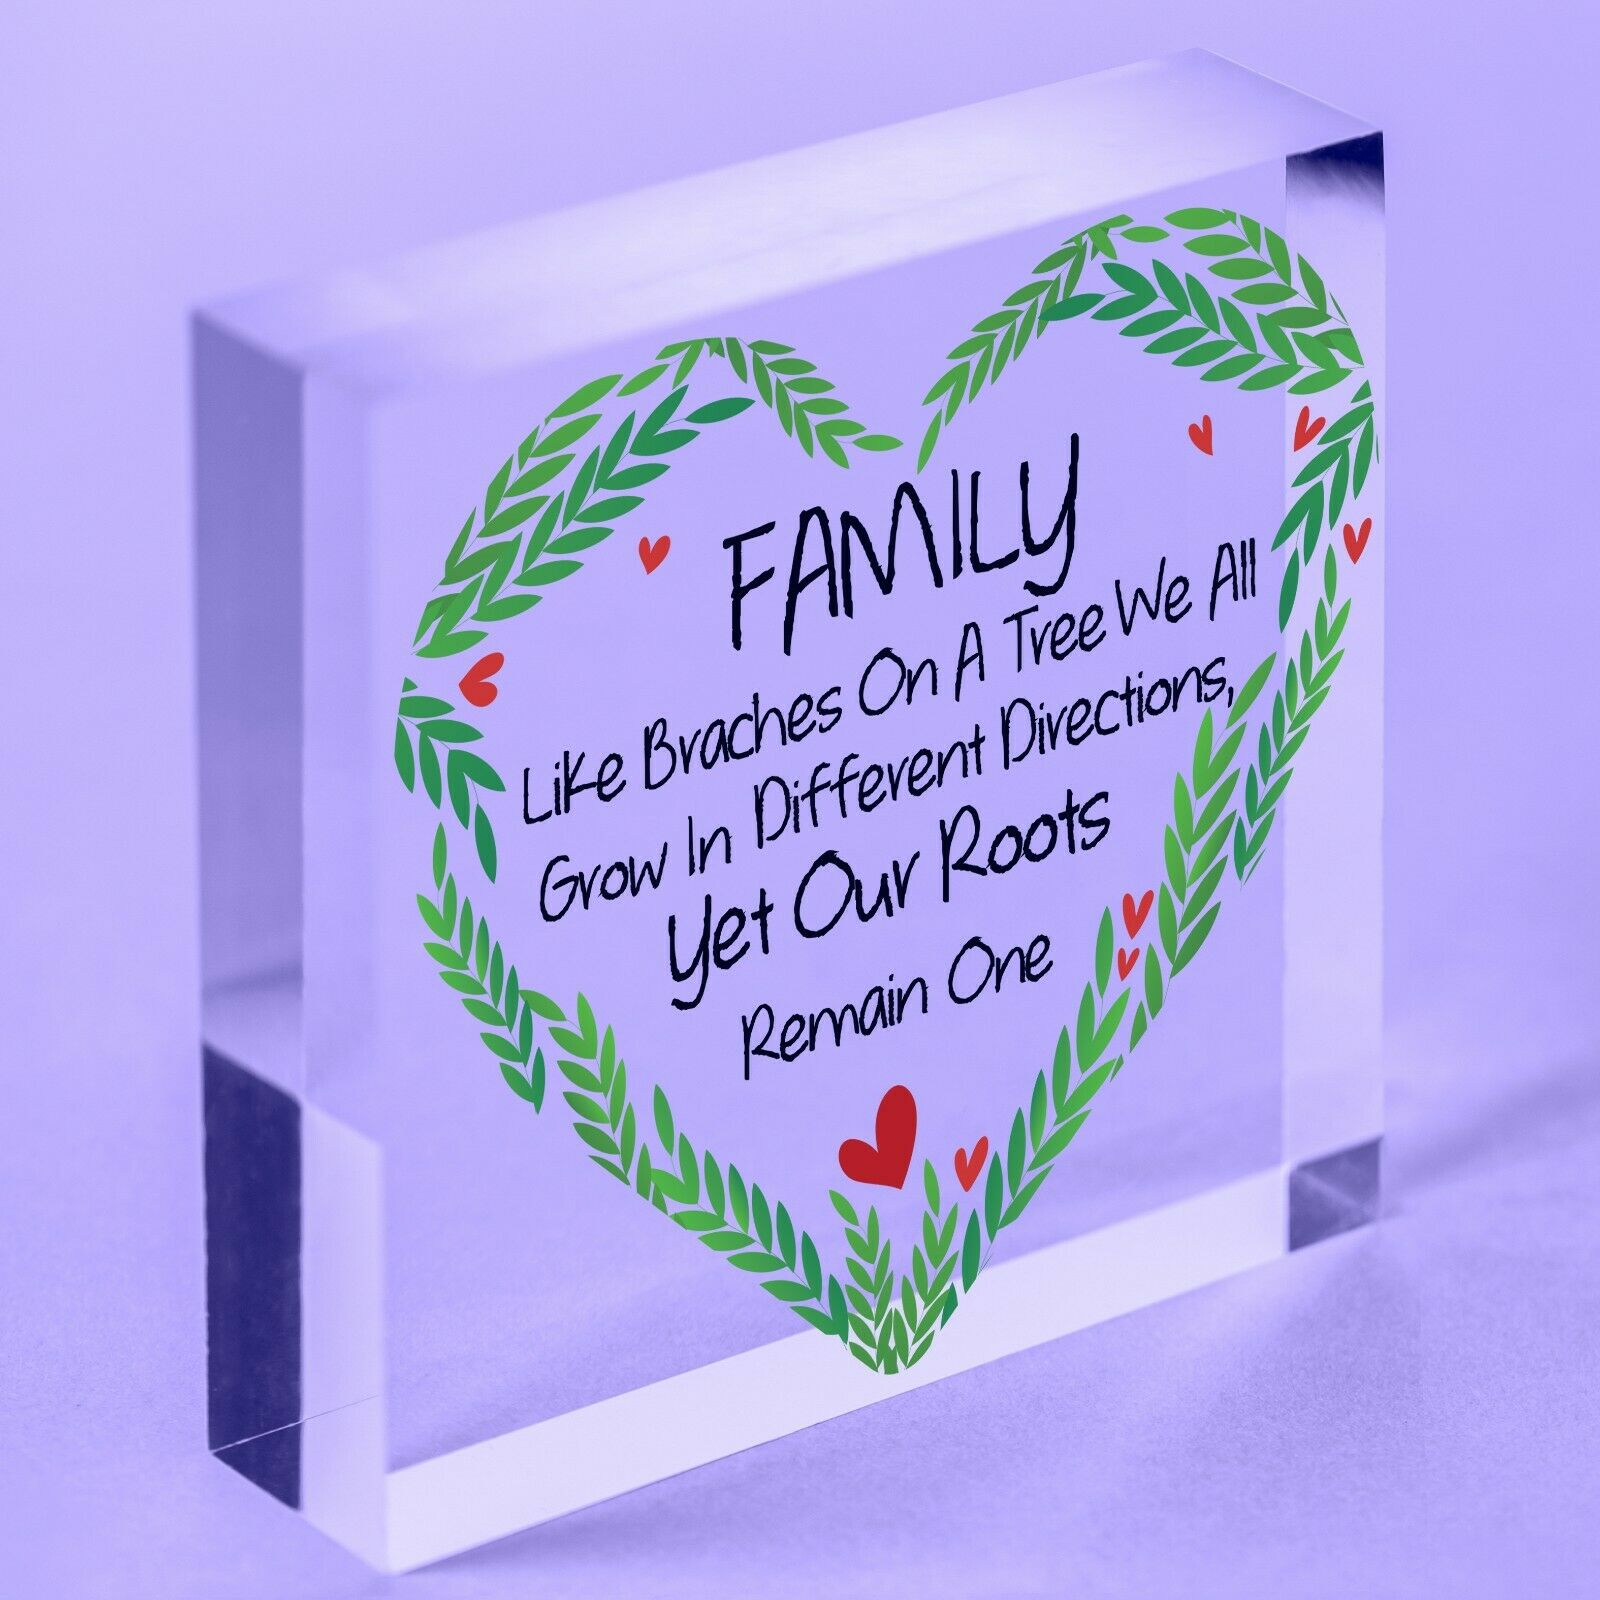 Family Roots Remain One Acrylic Block Shaped Families Plaque Love Gift